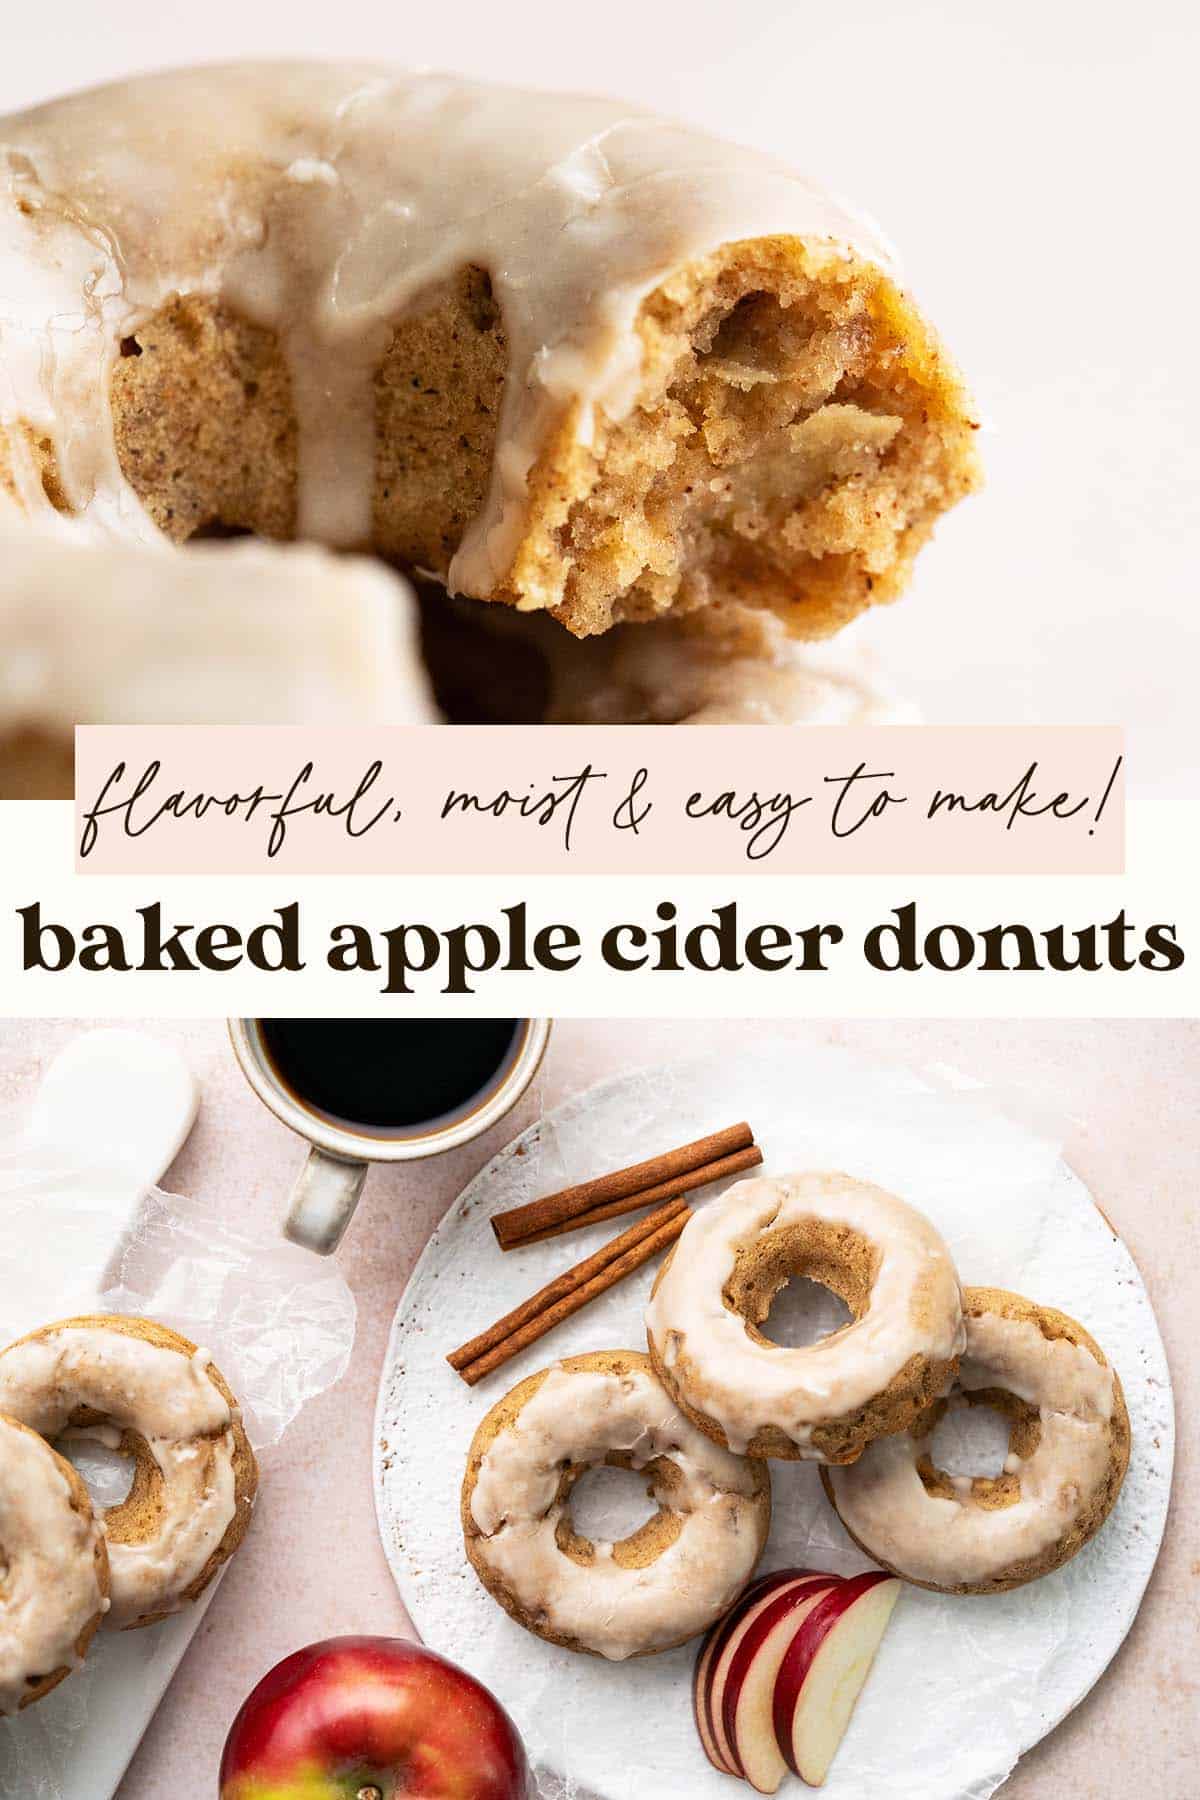 baked apple cider donuts recipe pin